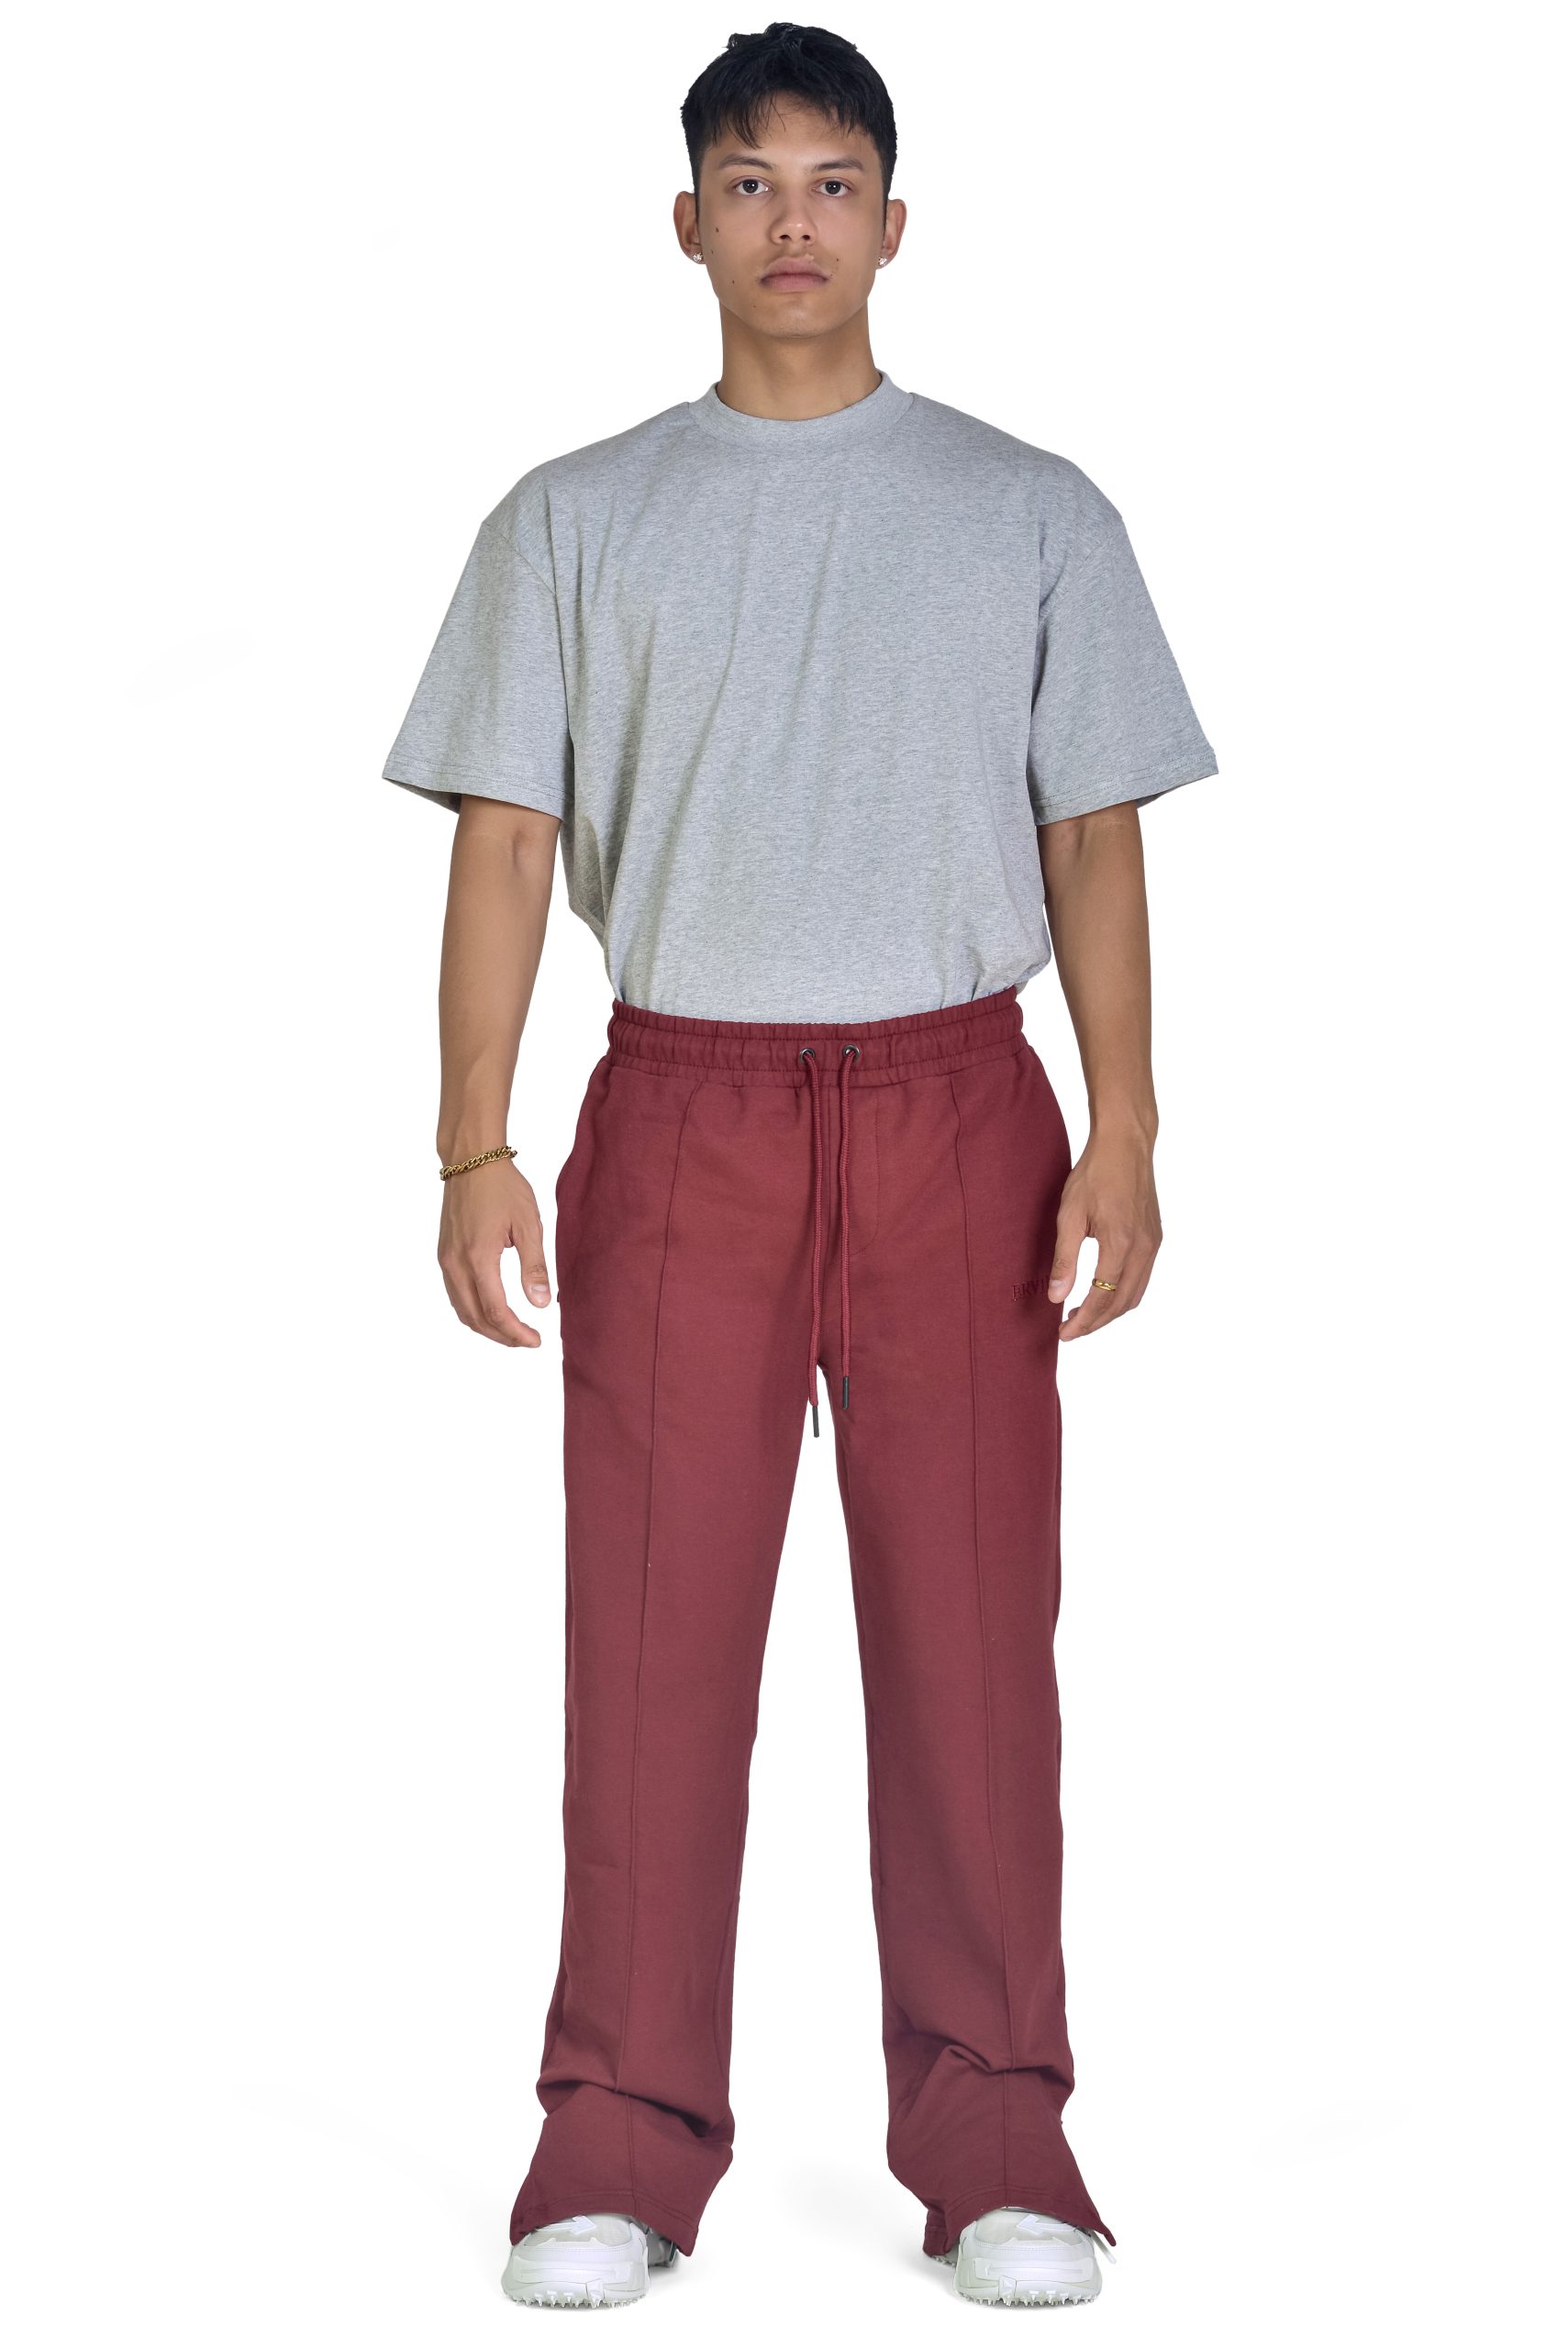 Wide-leg trouser for men and women with adjustable side slits, pockets, and drawstring. The perfect elevated sweatpants for everyday. Maroon Color.